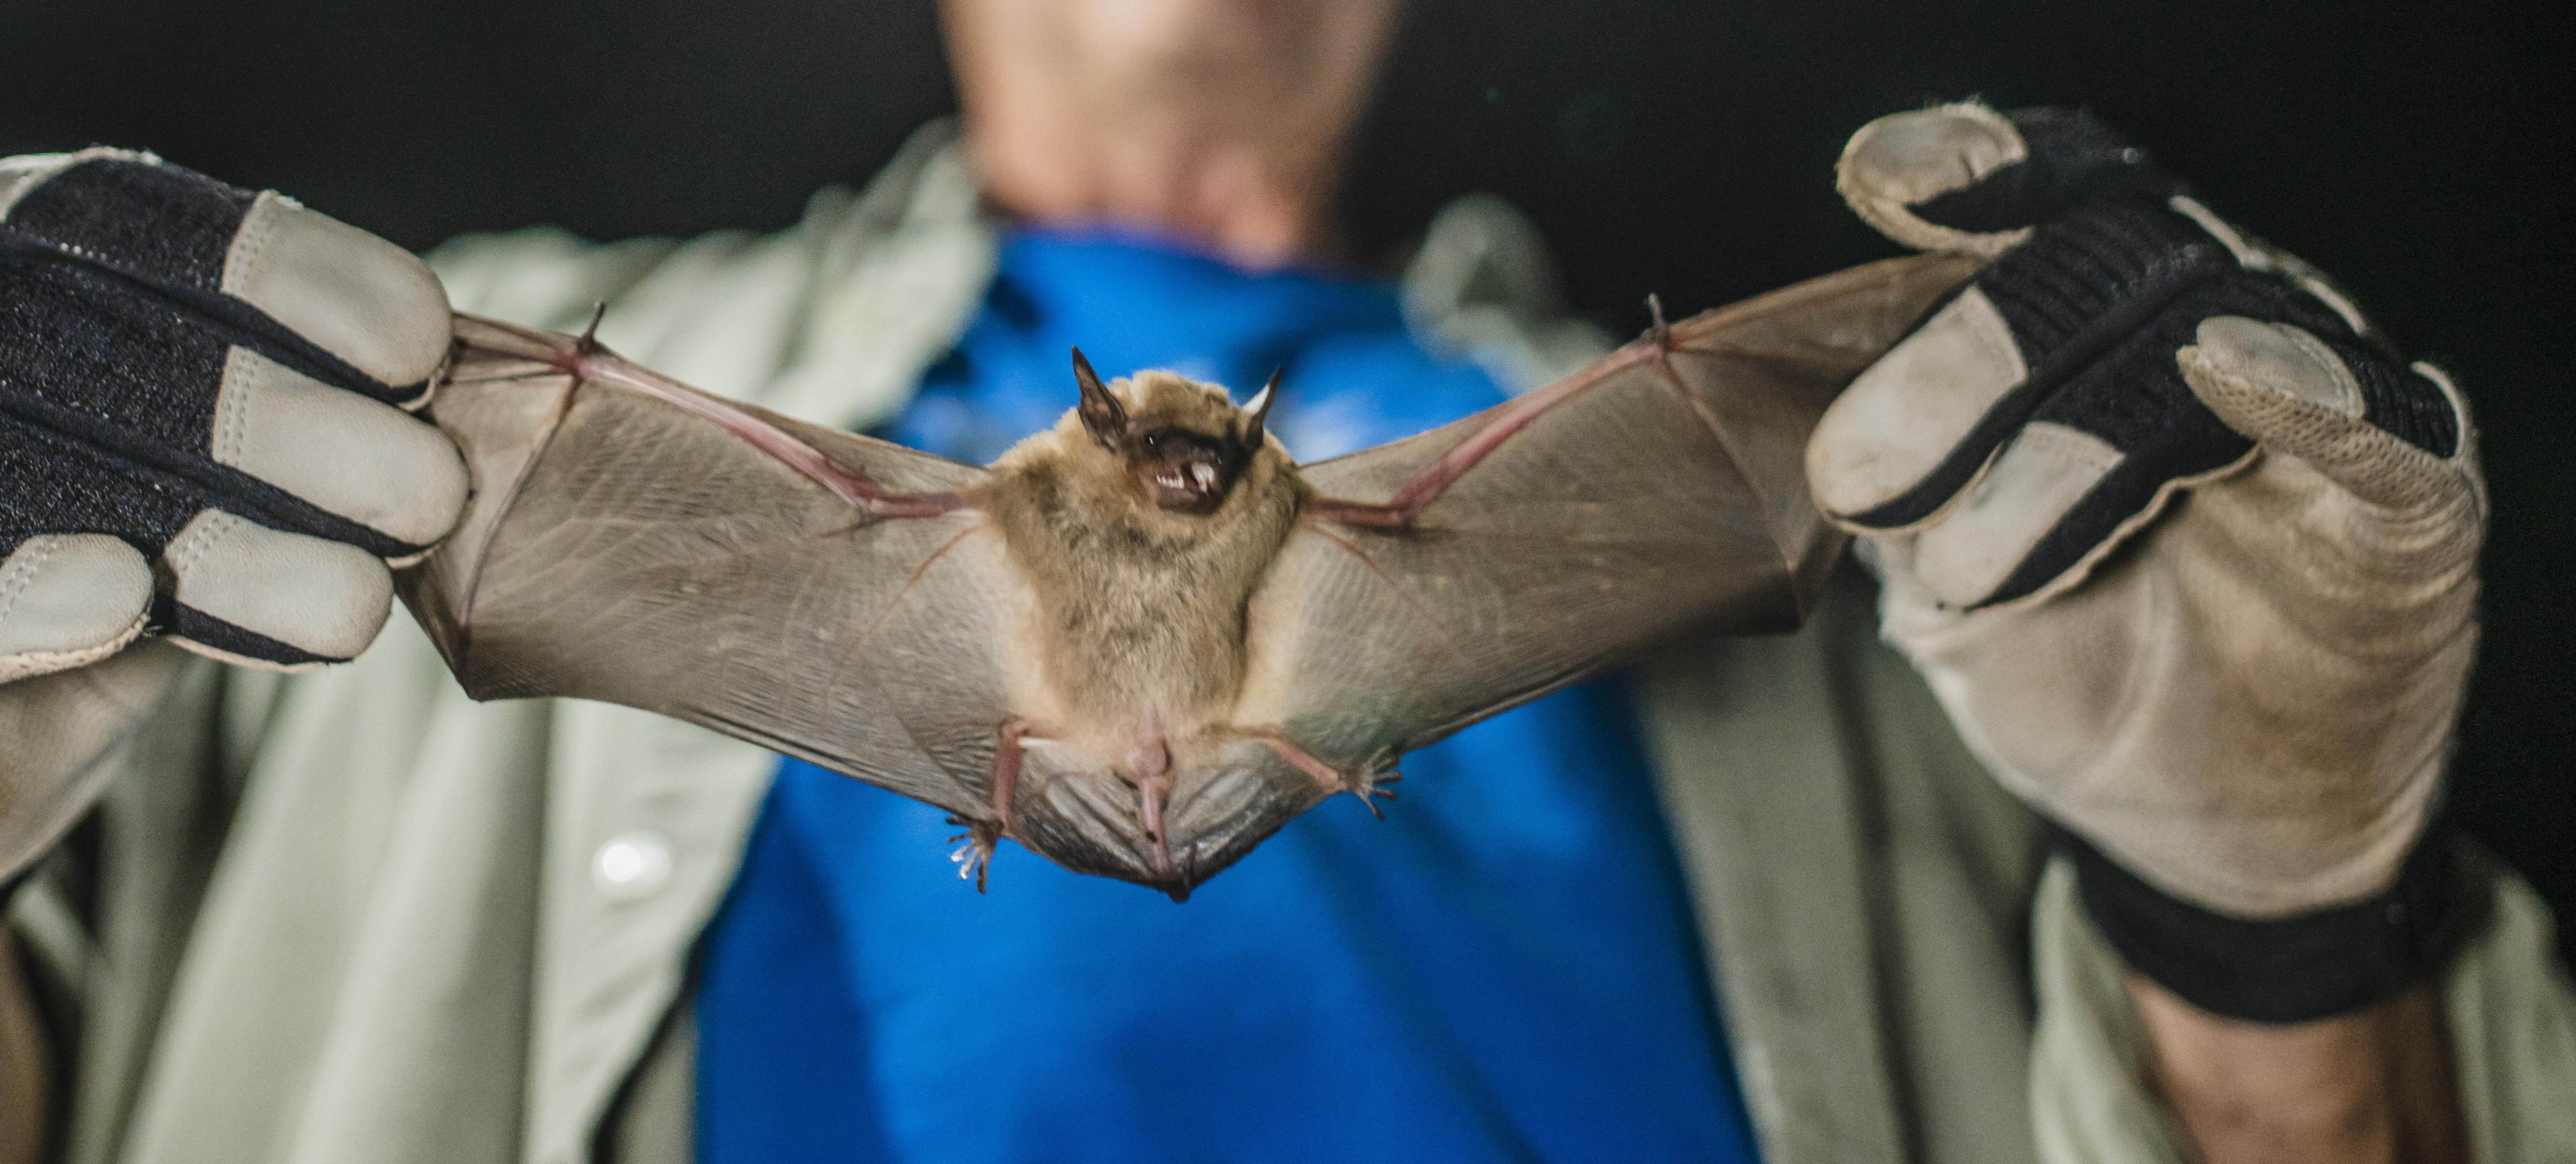 scientist holds close up bat with gloves